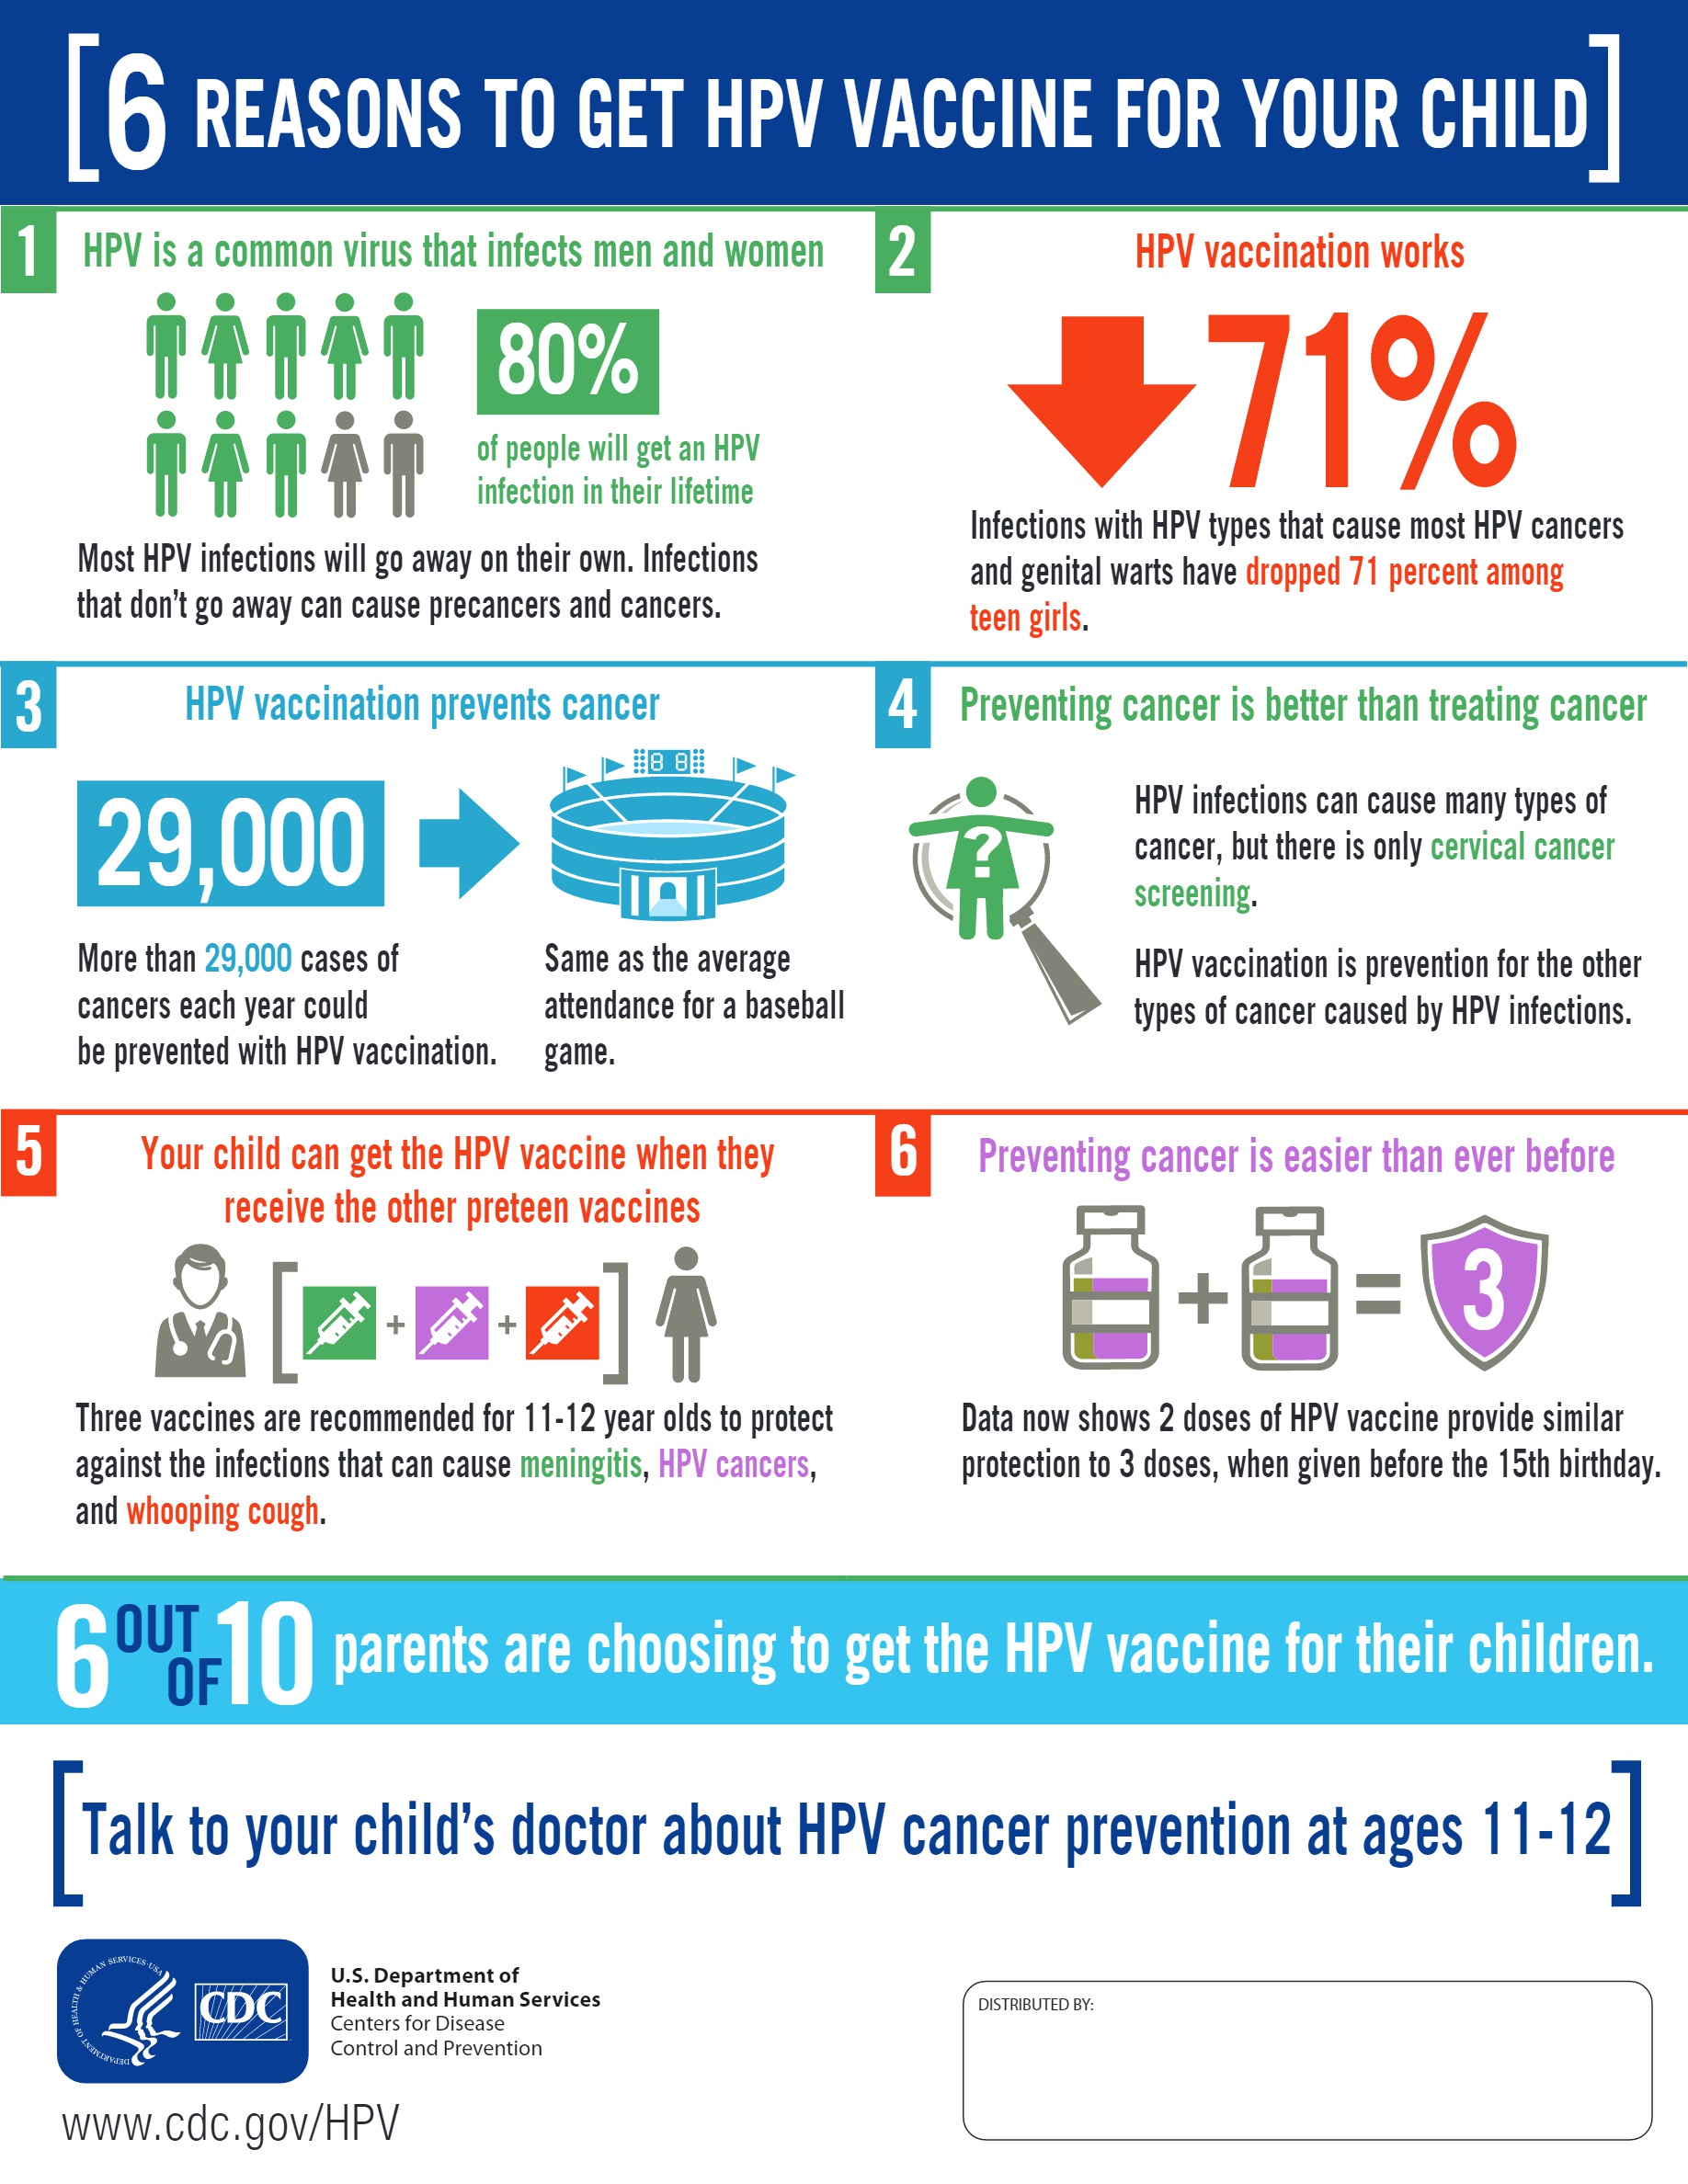 Six Reasons to Get the HPV Vaccine